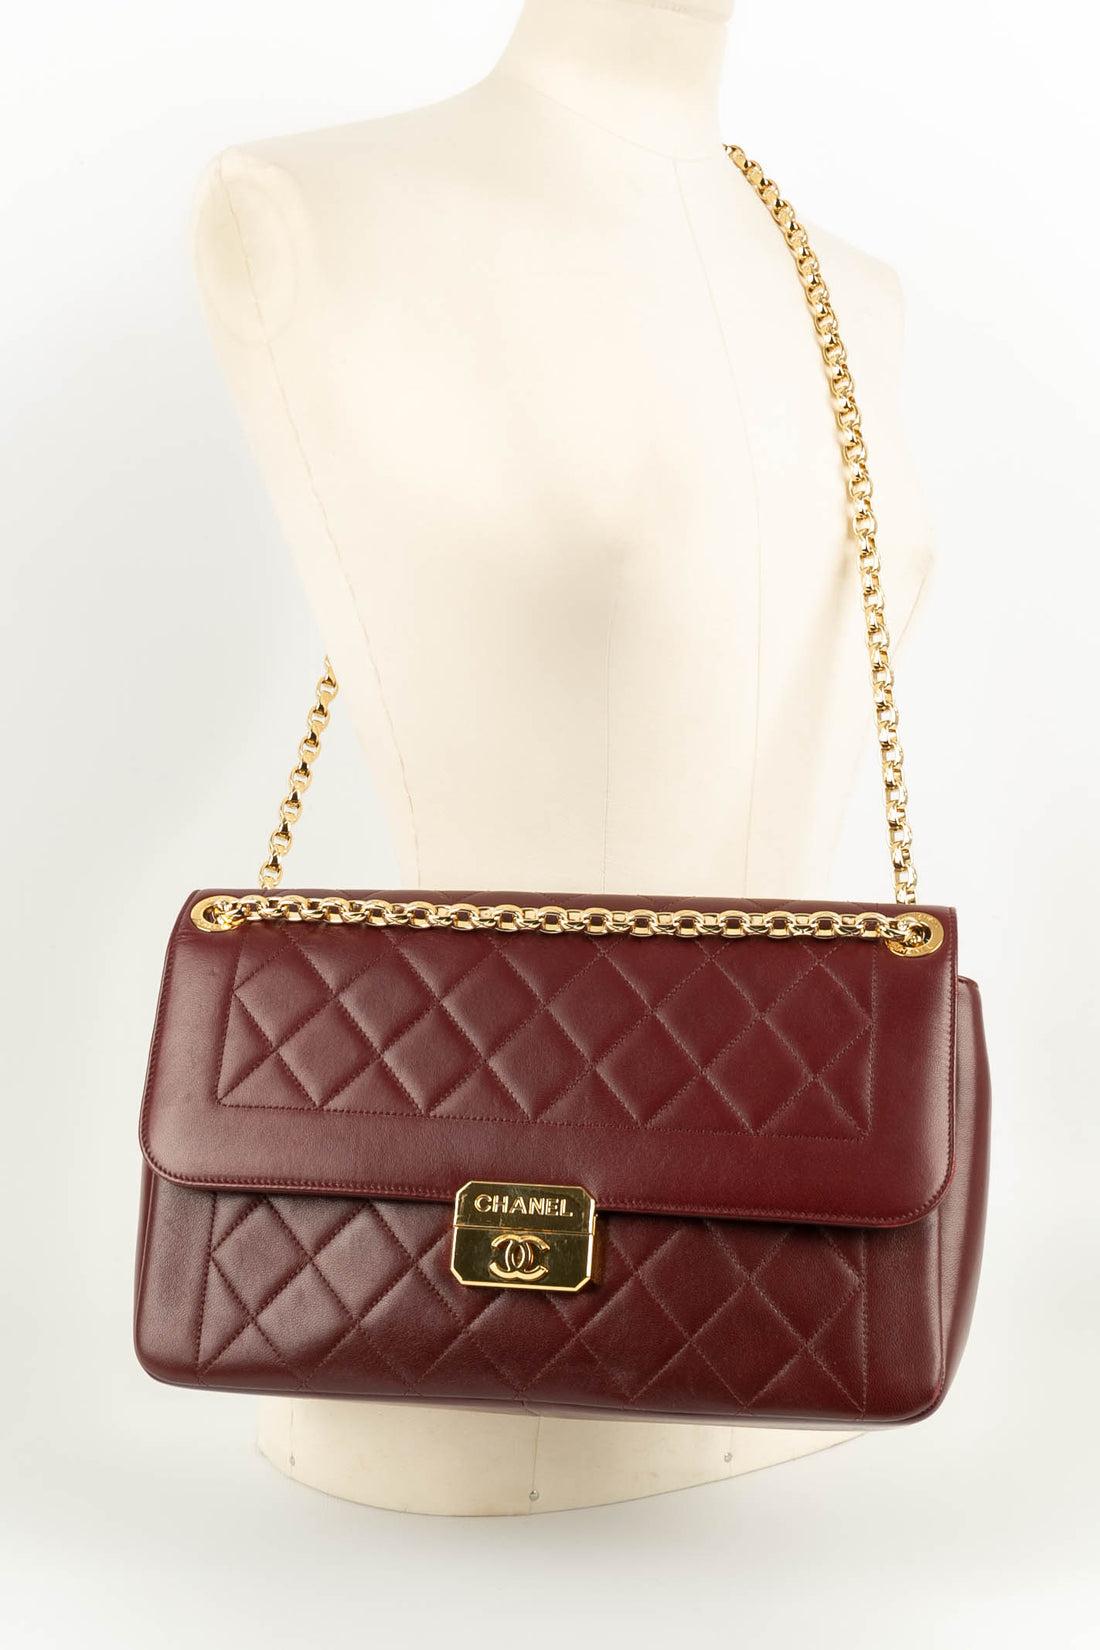 Chanel Burgundy Quilted Leather Bag, 2013/2014 For Sale 9